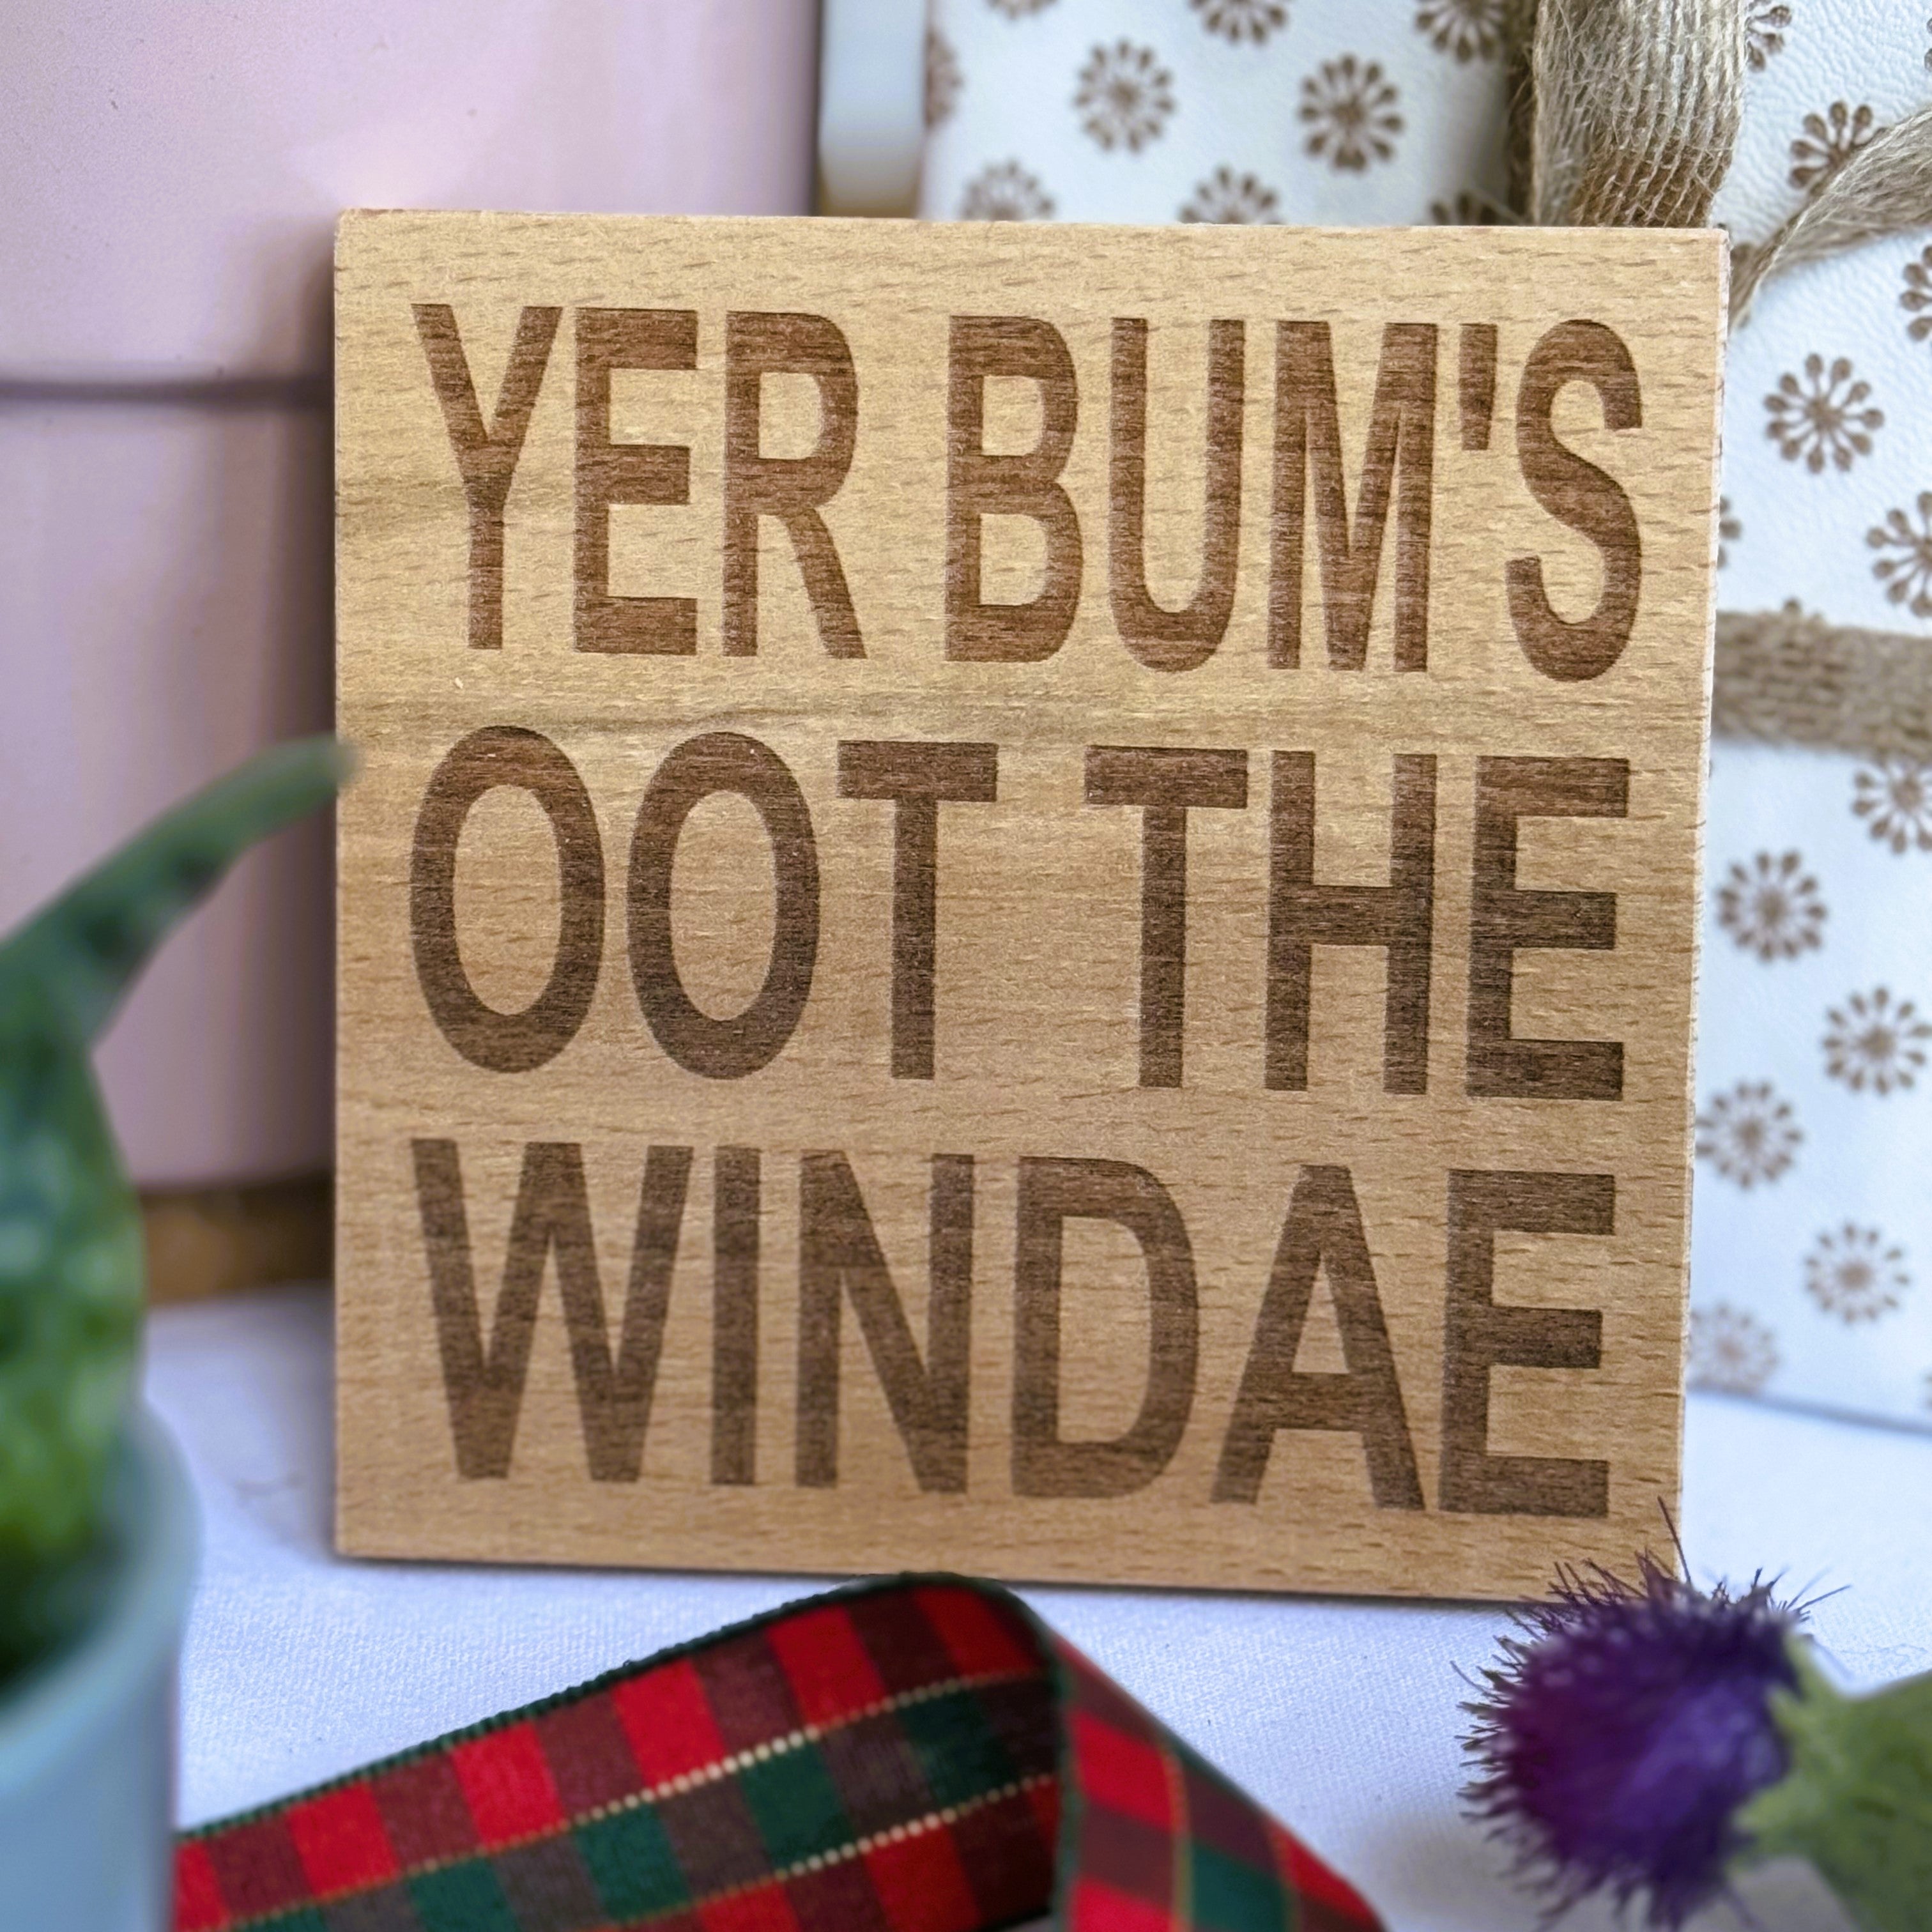 Wooden coaster gift - Scottish dialect - yer bum's oot the windae